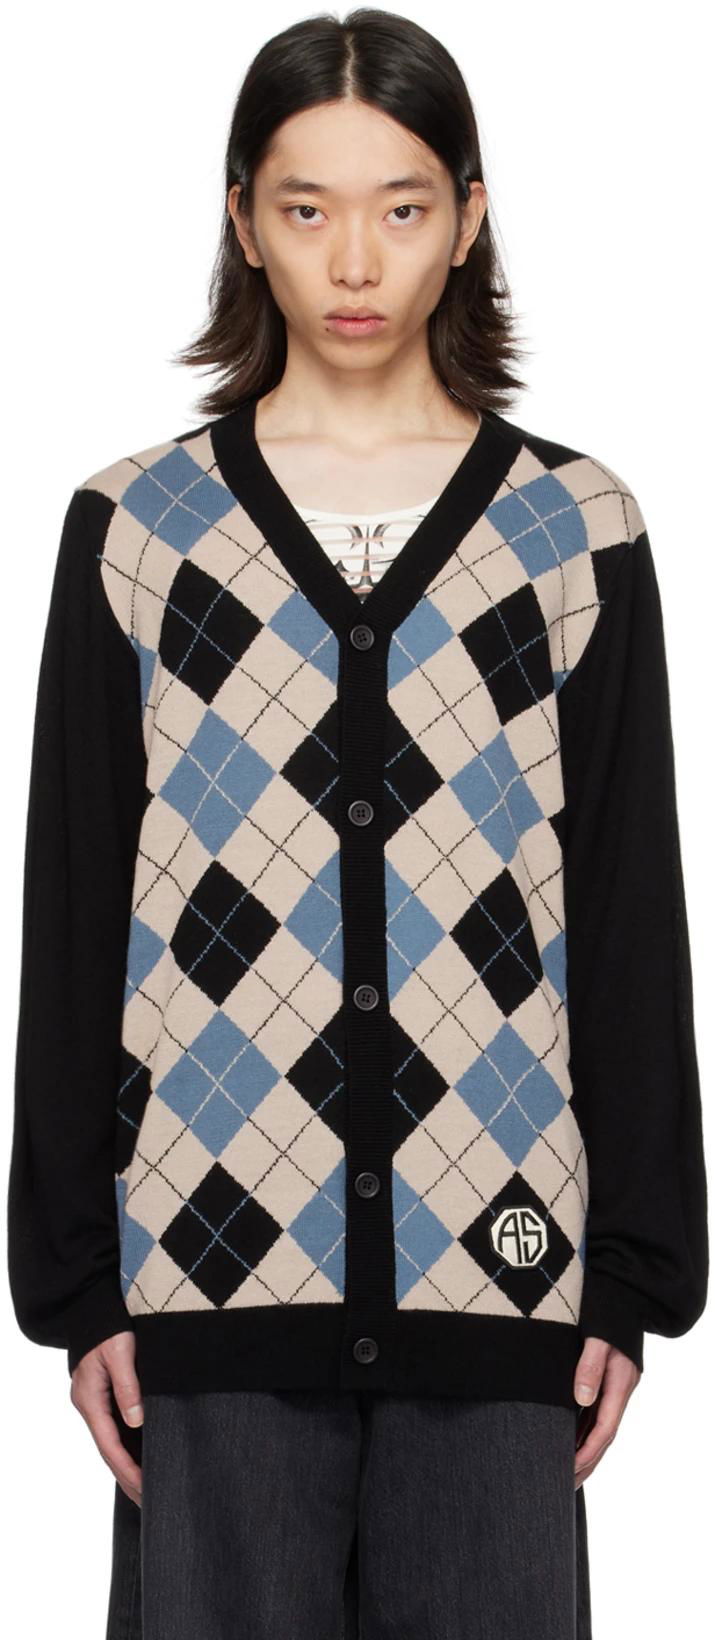 SSENSE Exclusive Blue Cardigan by ANNA SUI